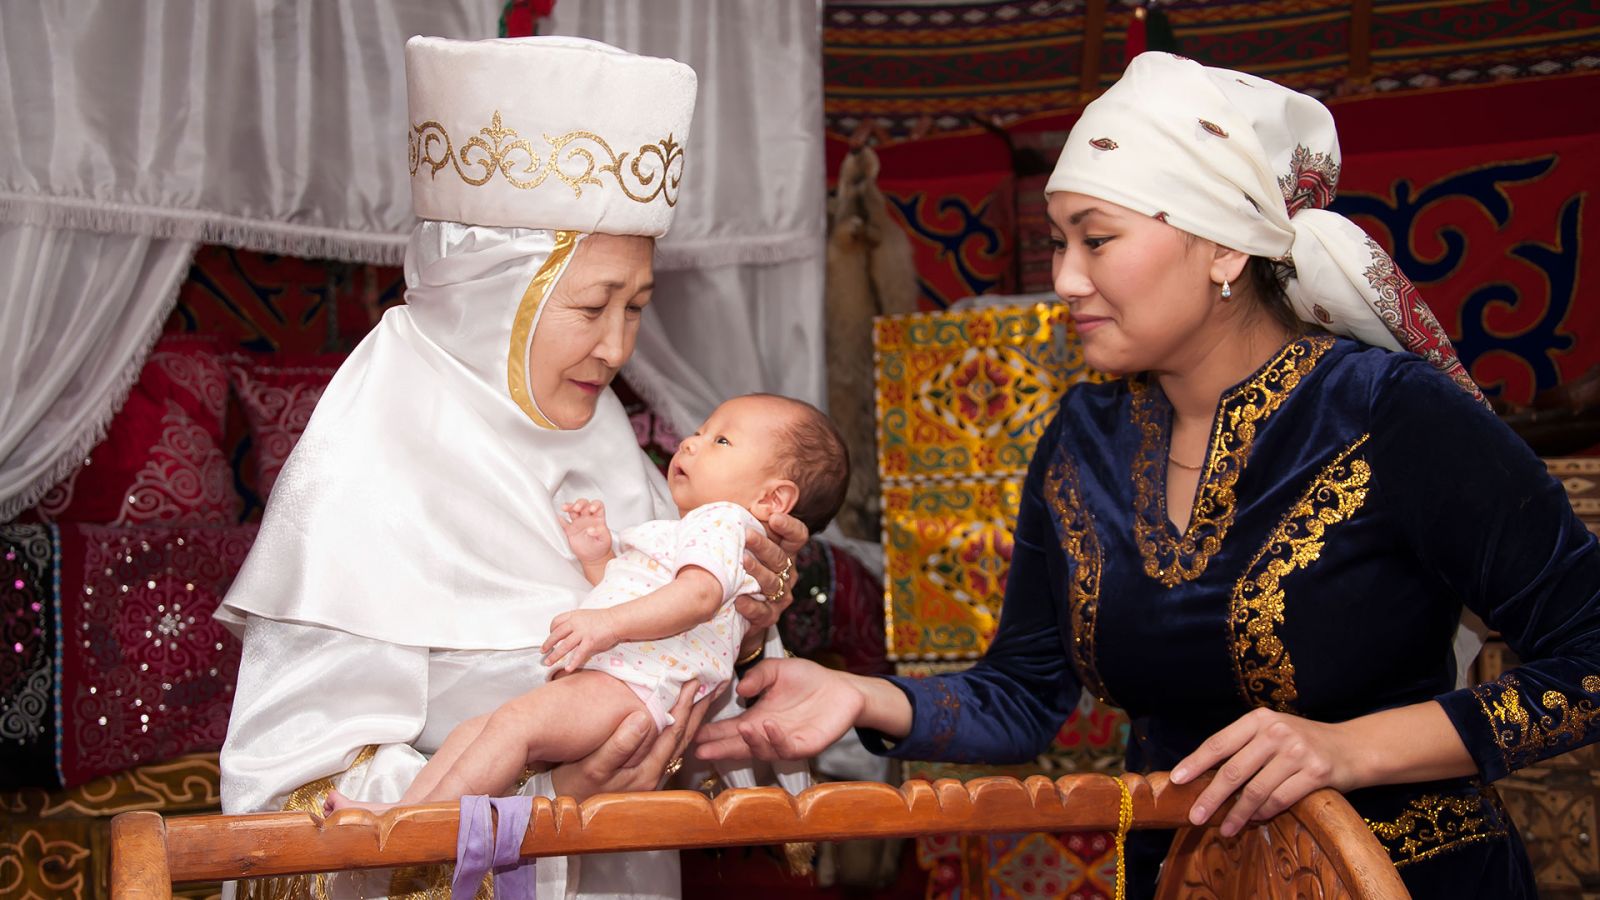 KAZAKH TRADITIONS ON THE OCCASION OF BIRTH OF A CHILD 